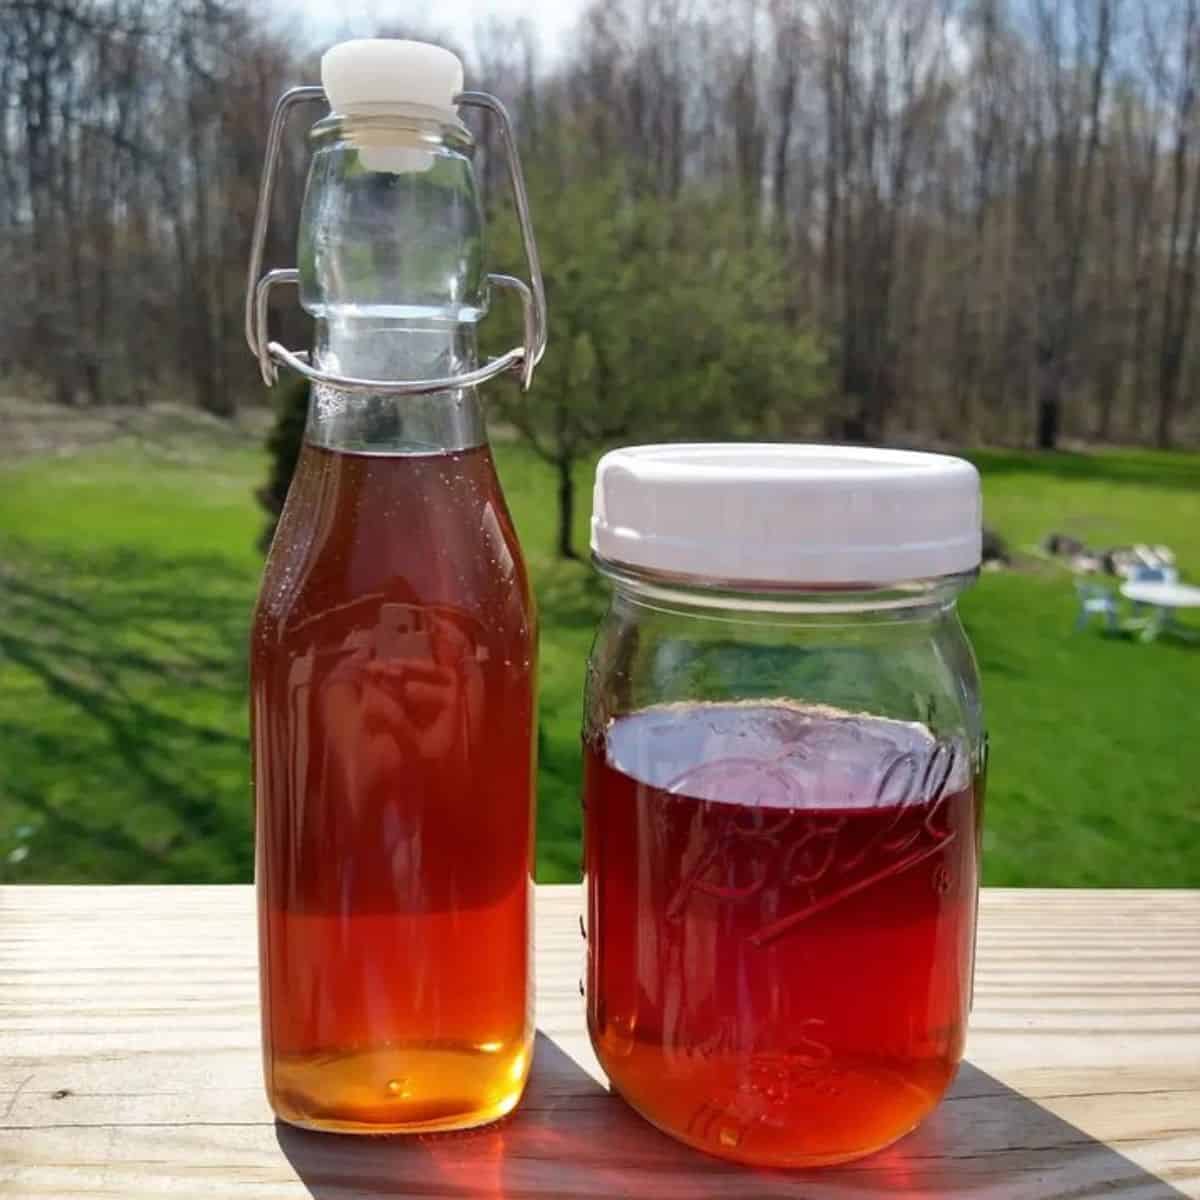 Magnolia syrup has a pinkish colour while gomme syrup is orangey